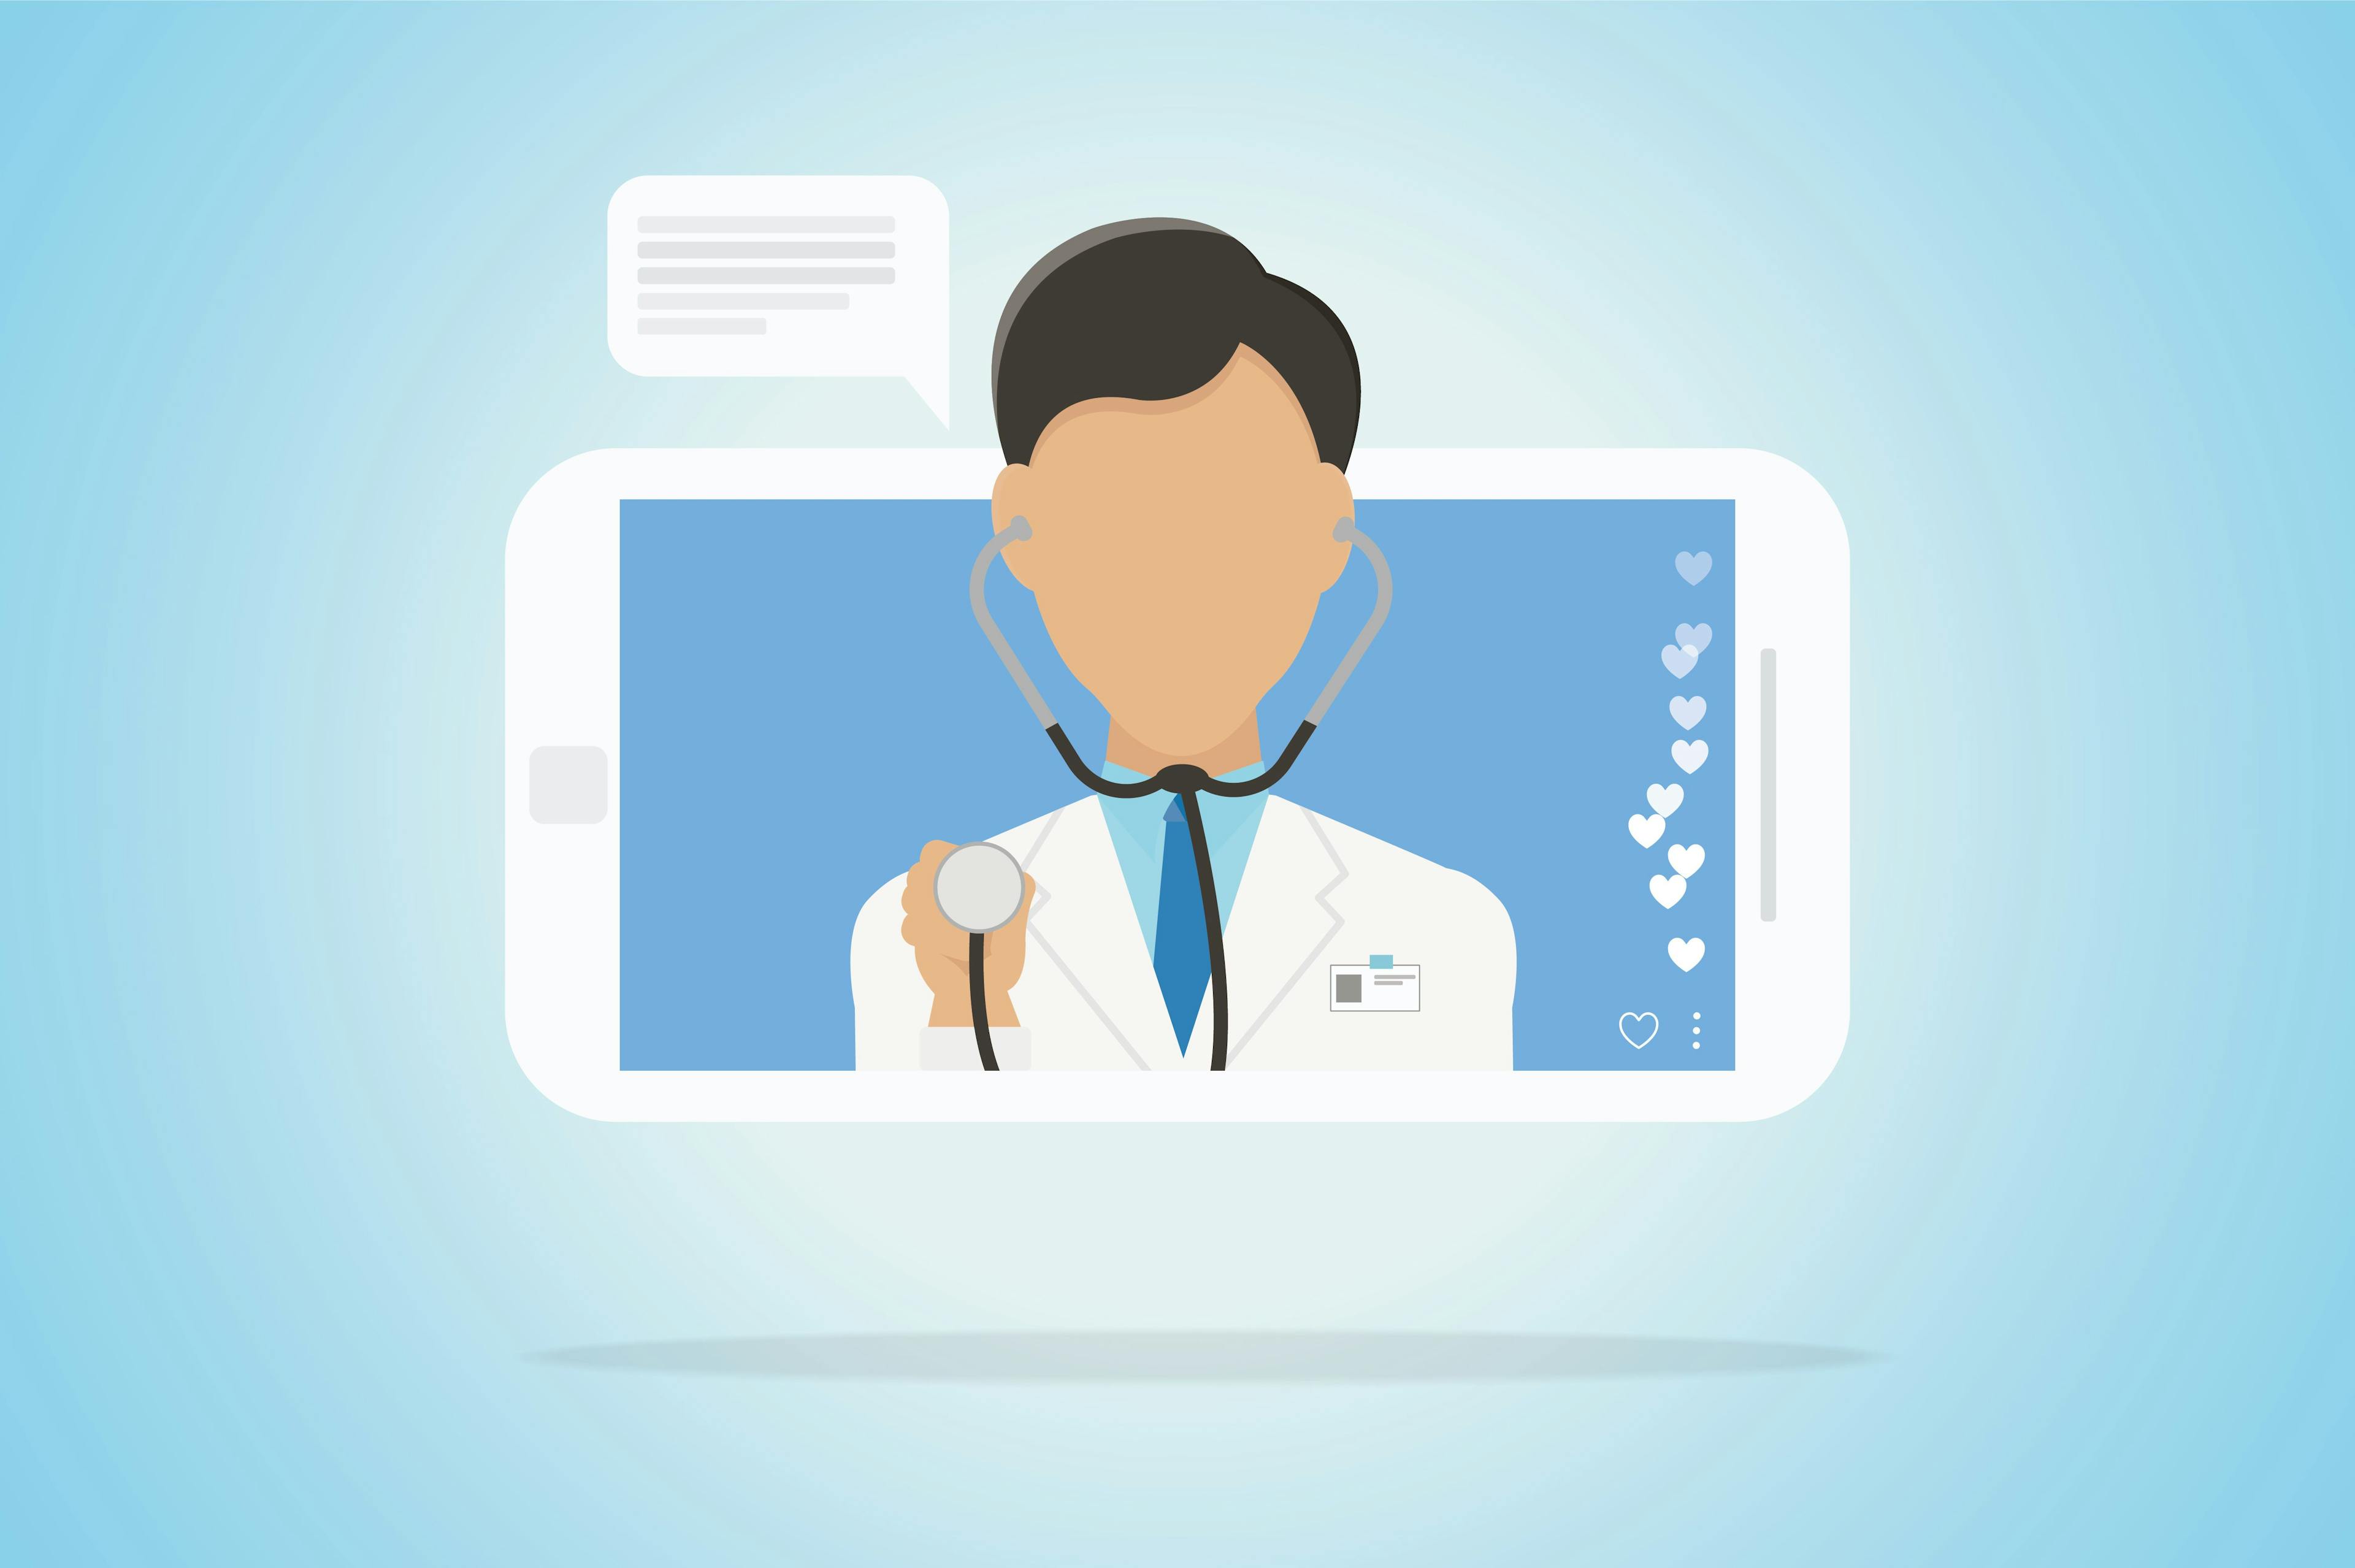 Virtual Primary Care Can’t Be Just the Old Model With Virtual Care Pasted On 